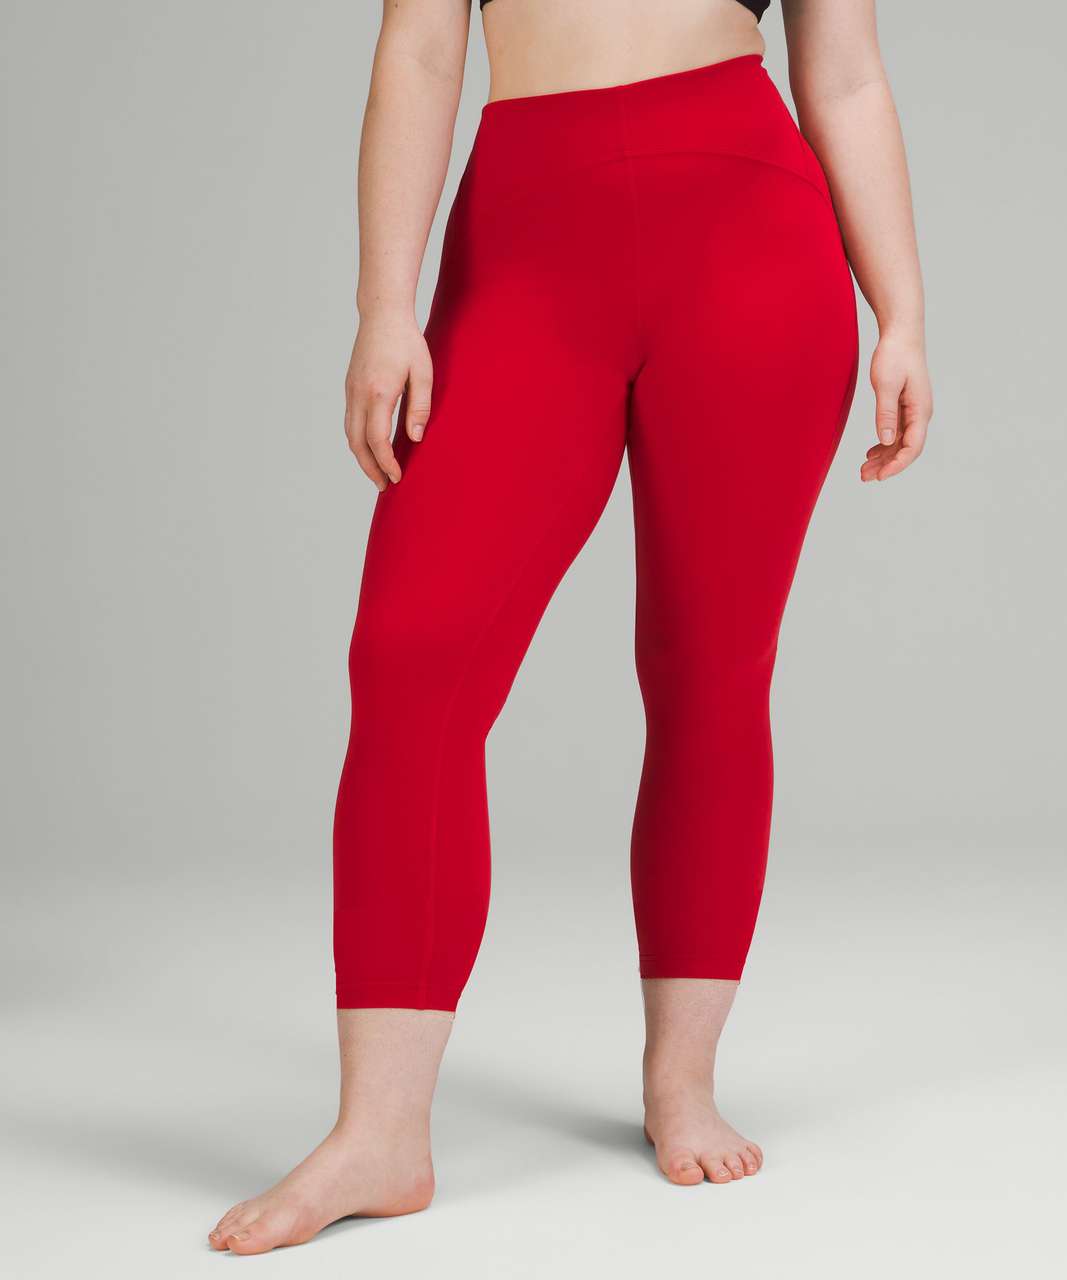 Intrigue Red Ribbed Leggings